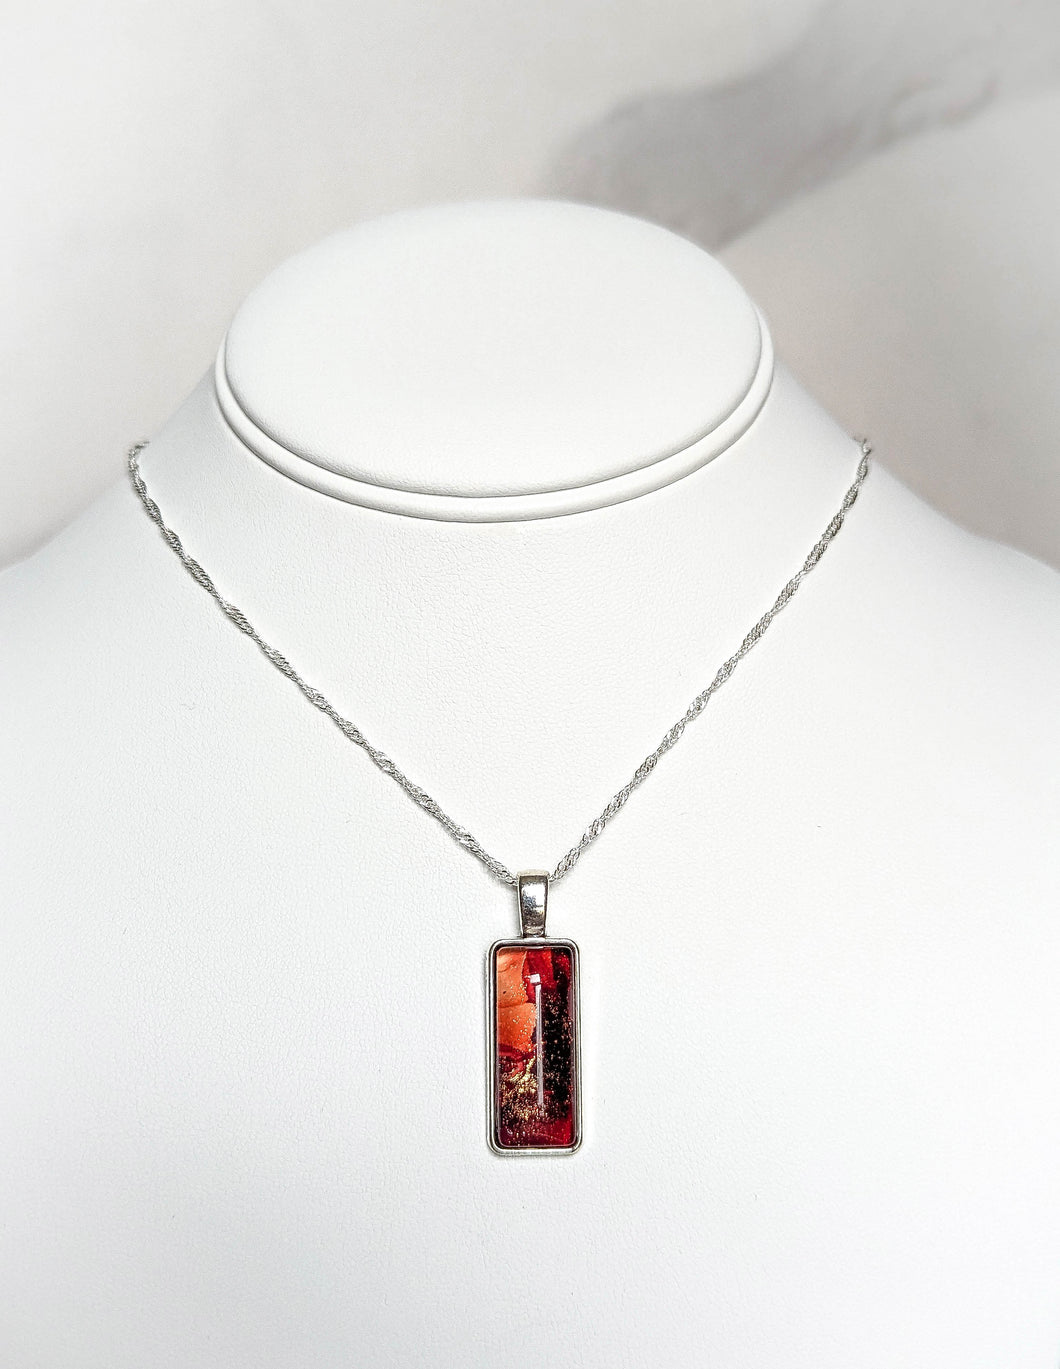 Hand painted alcohol ink pendant necklace